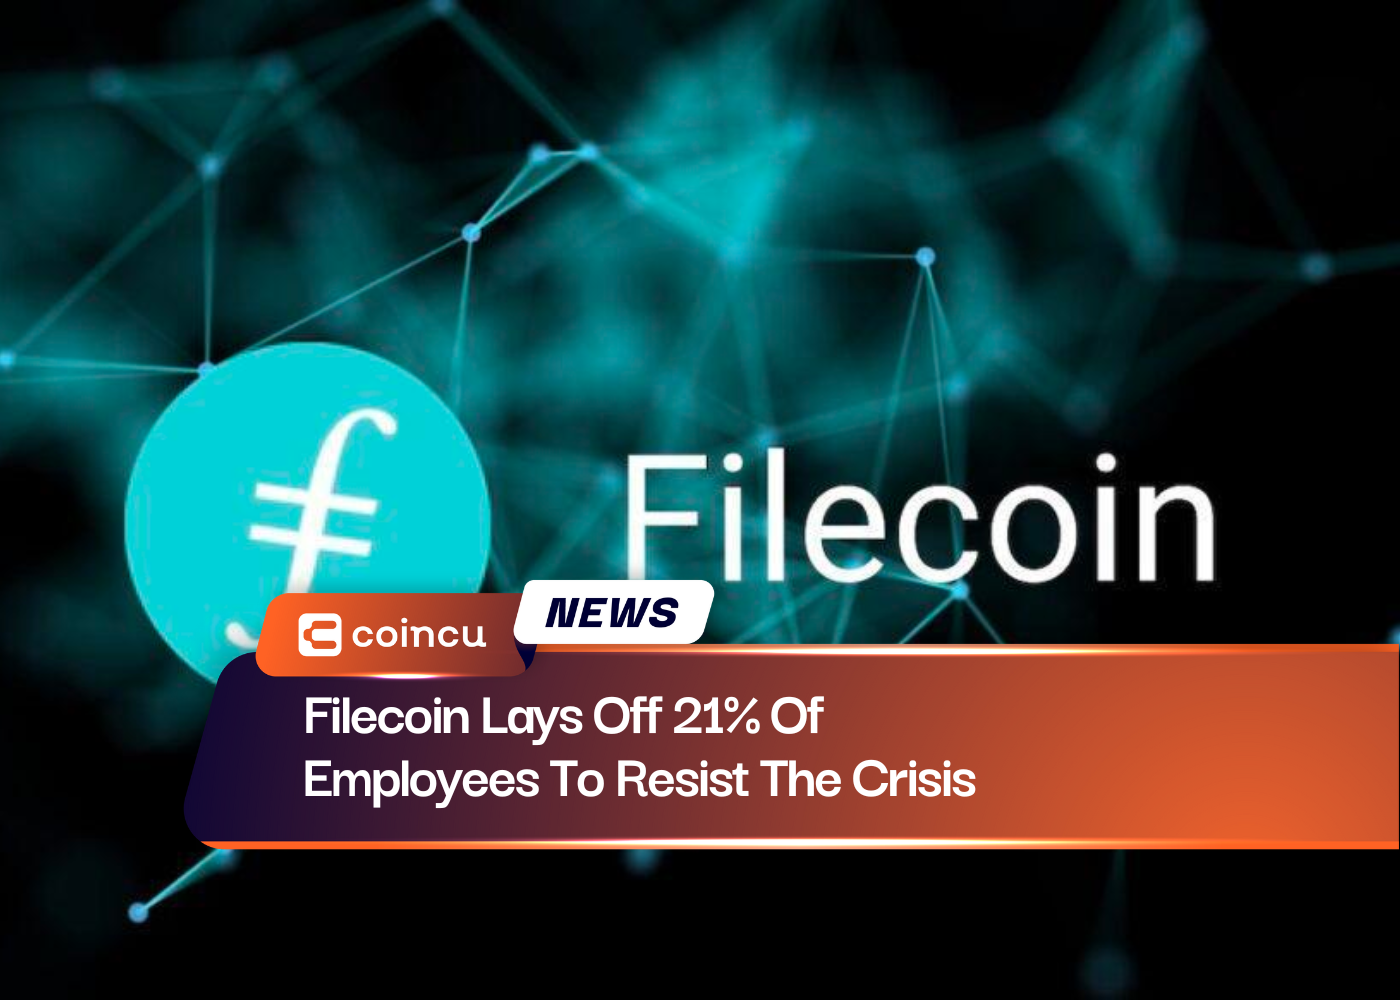 Filecoin Lays Off 21% Of Employees To Resist The Crisis